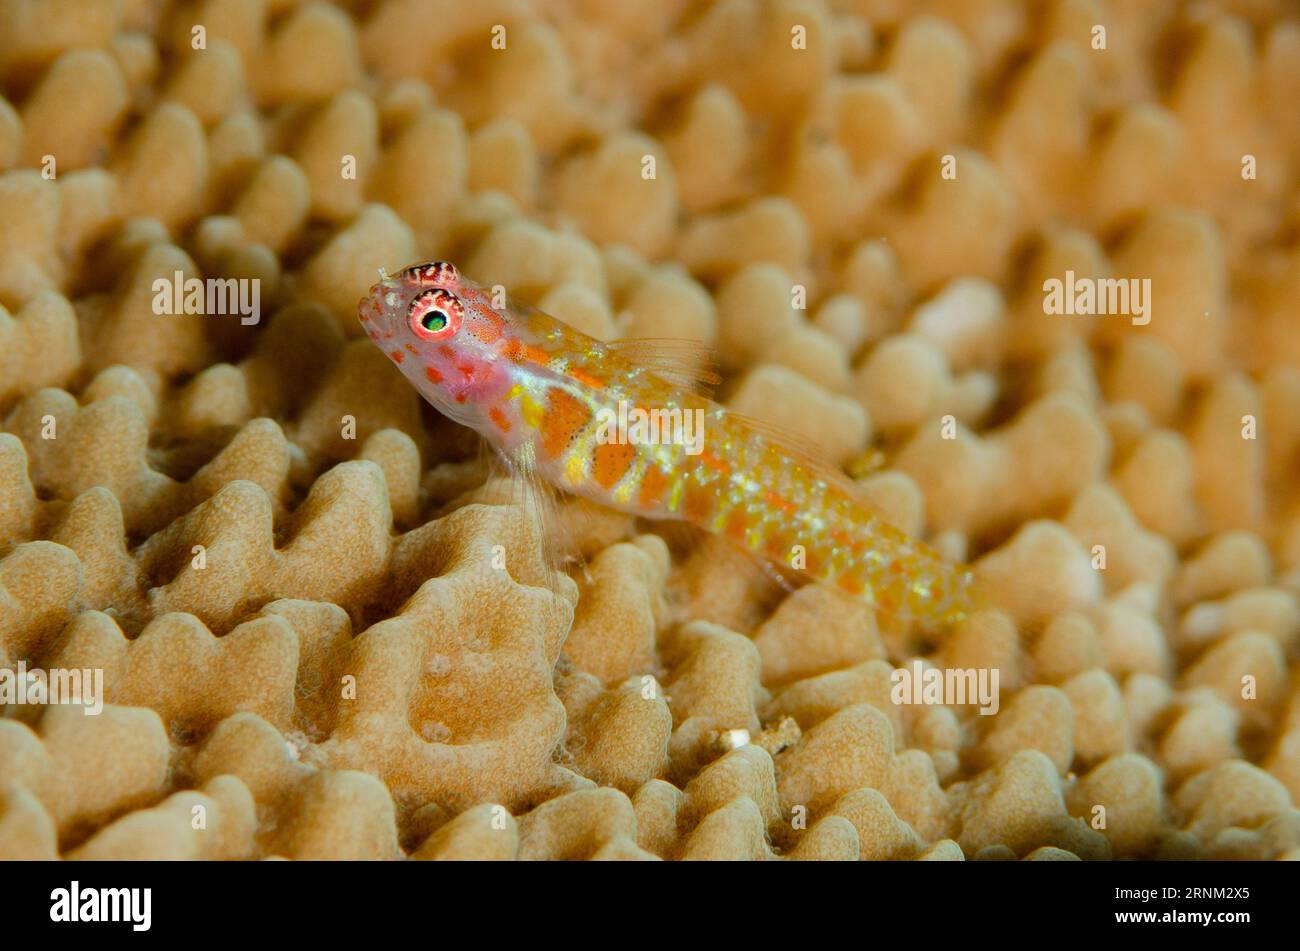 Spotted Pygmygoby, Eviota guttata, on coral, Four Kings dive site, Misool, Raja Ampat, West Papua, Indonesia Stock Photo